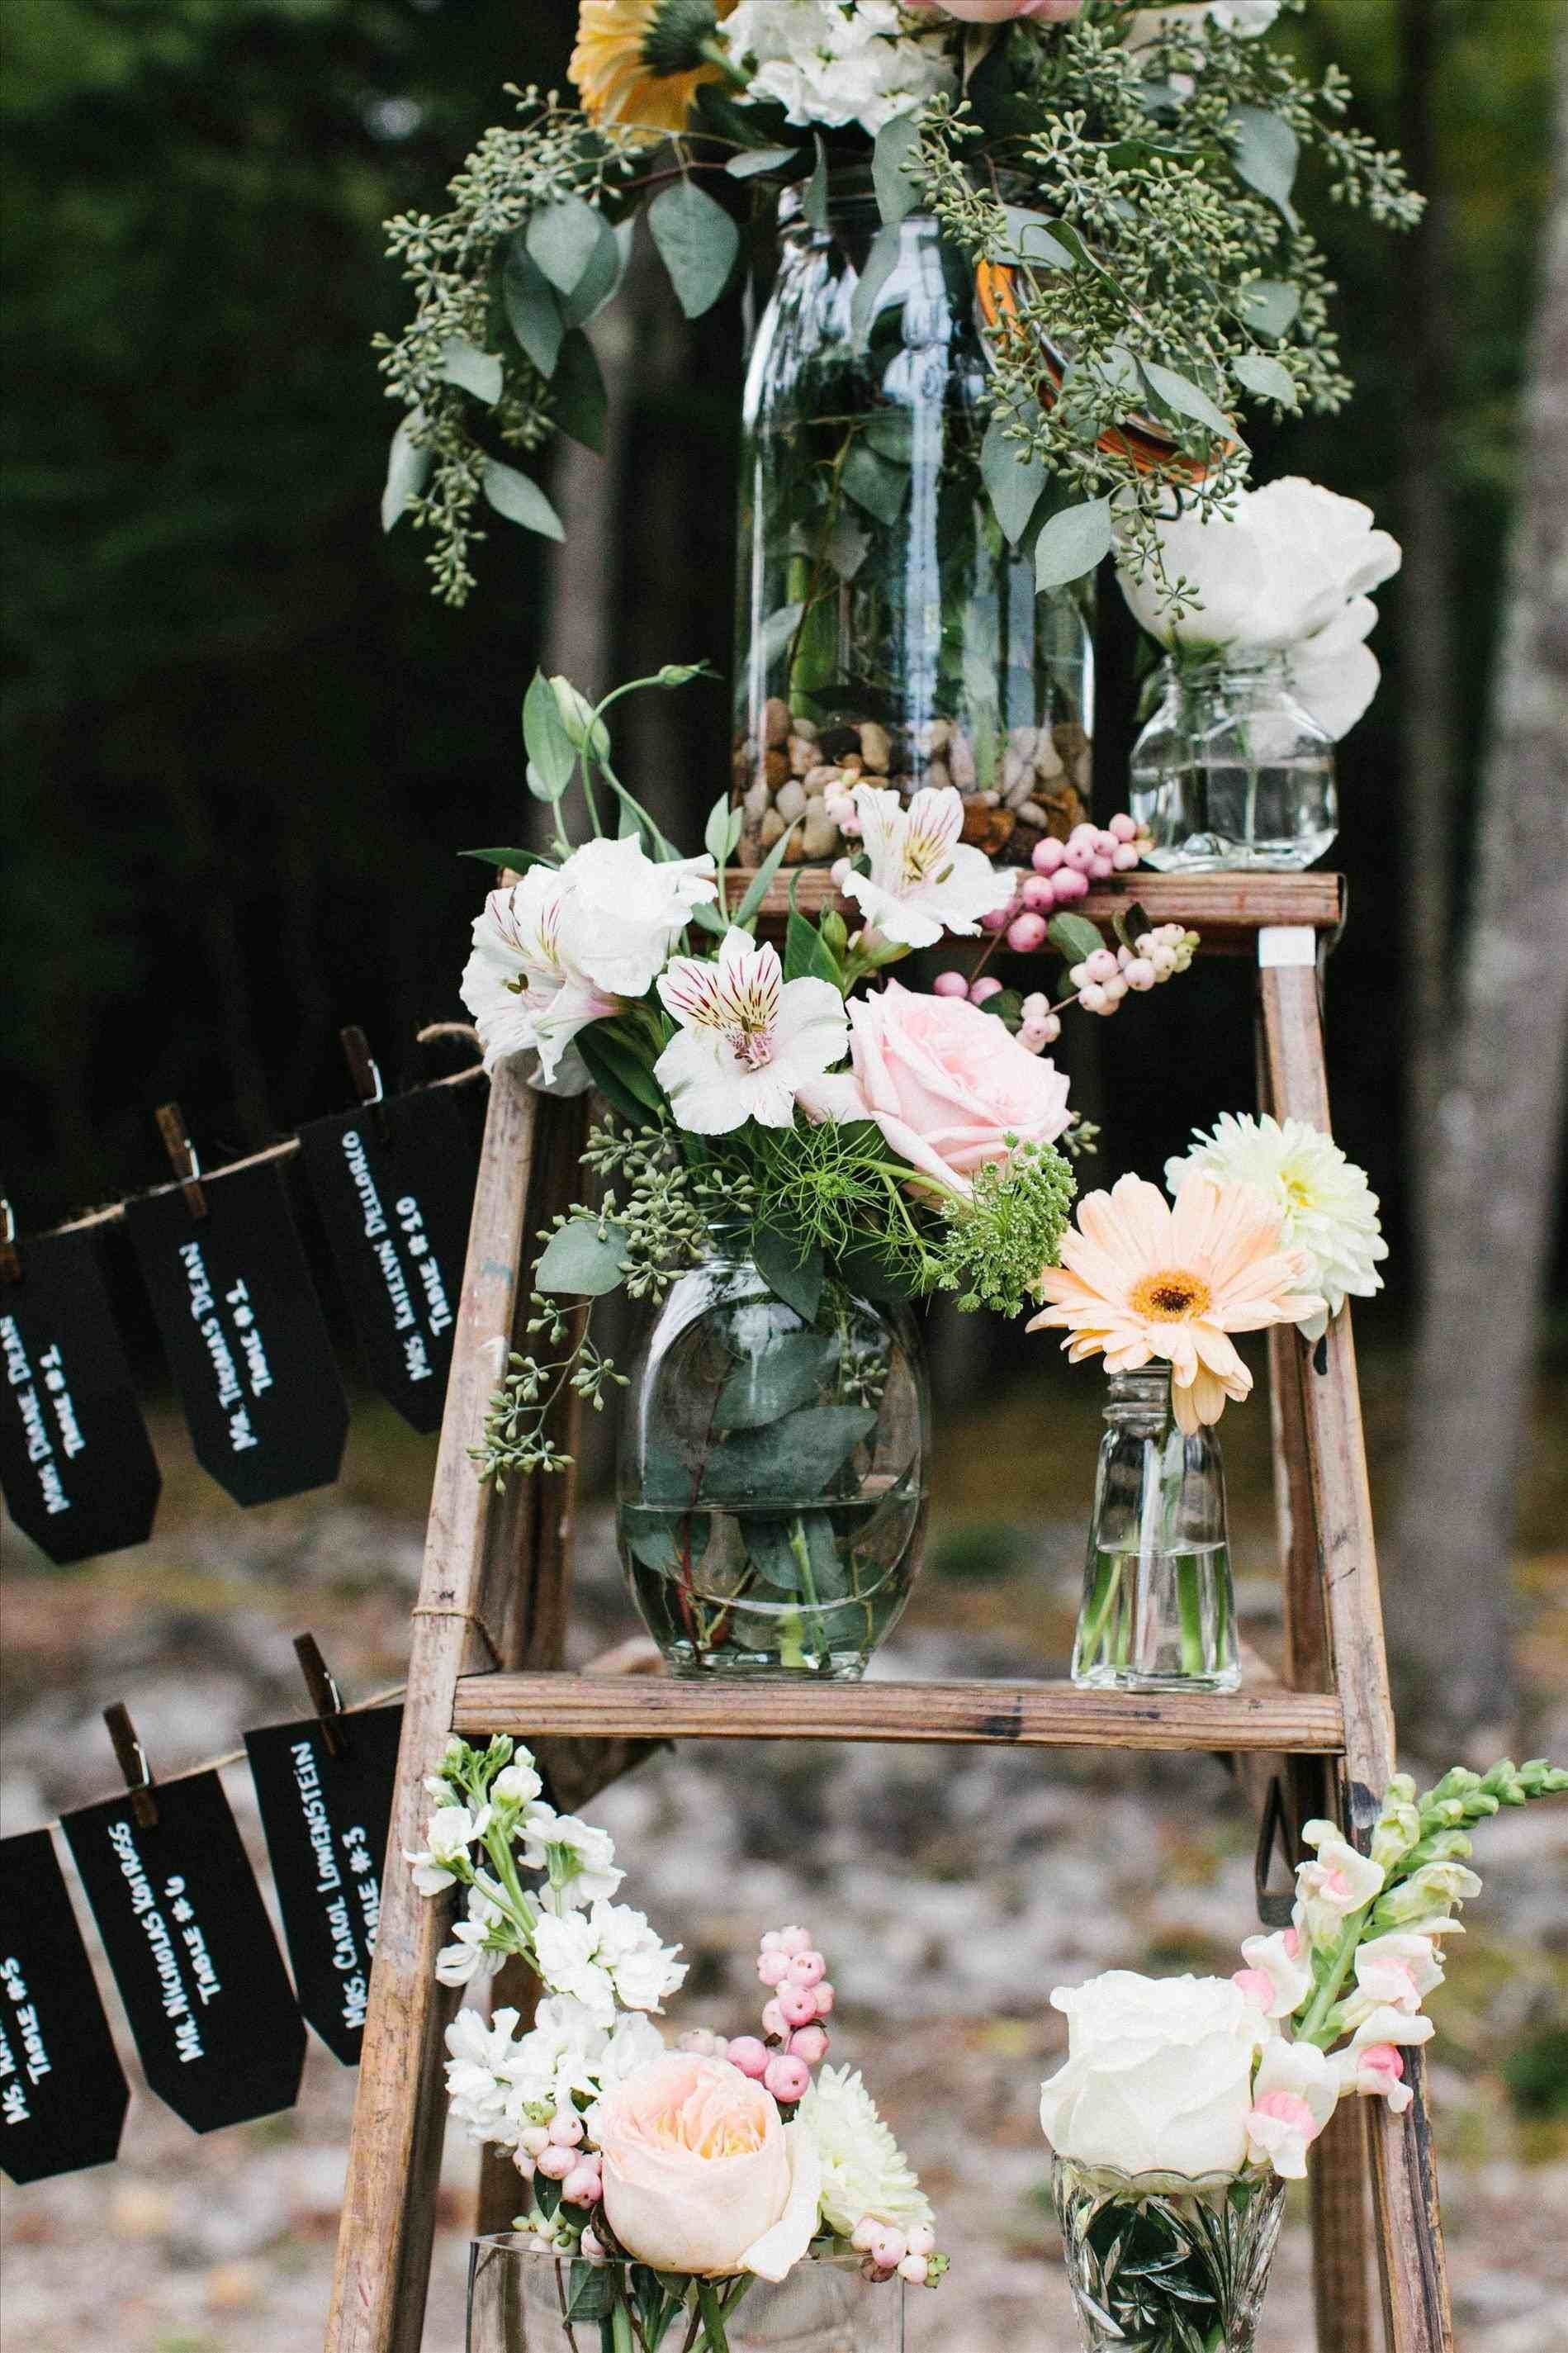 28 Unique Different Types Of Vases 2024 free download different types of vases of vintage weddings ideas lovely mirrored square vase 3h vases mirror throughout vintage weddings ideas awesome elegant vintage wedding decor home ideas pinterest of